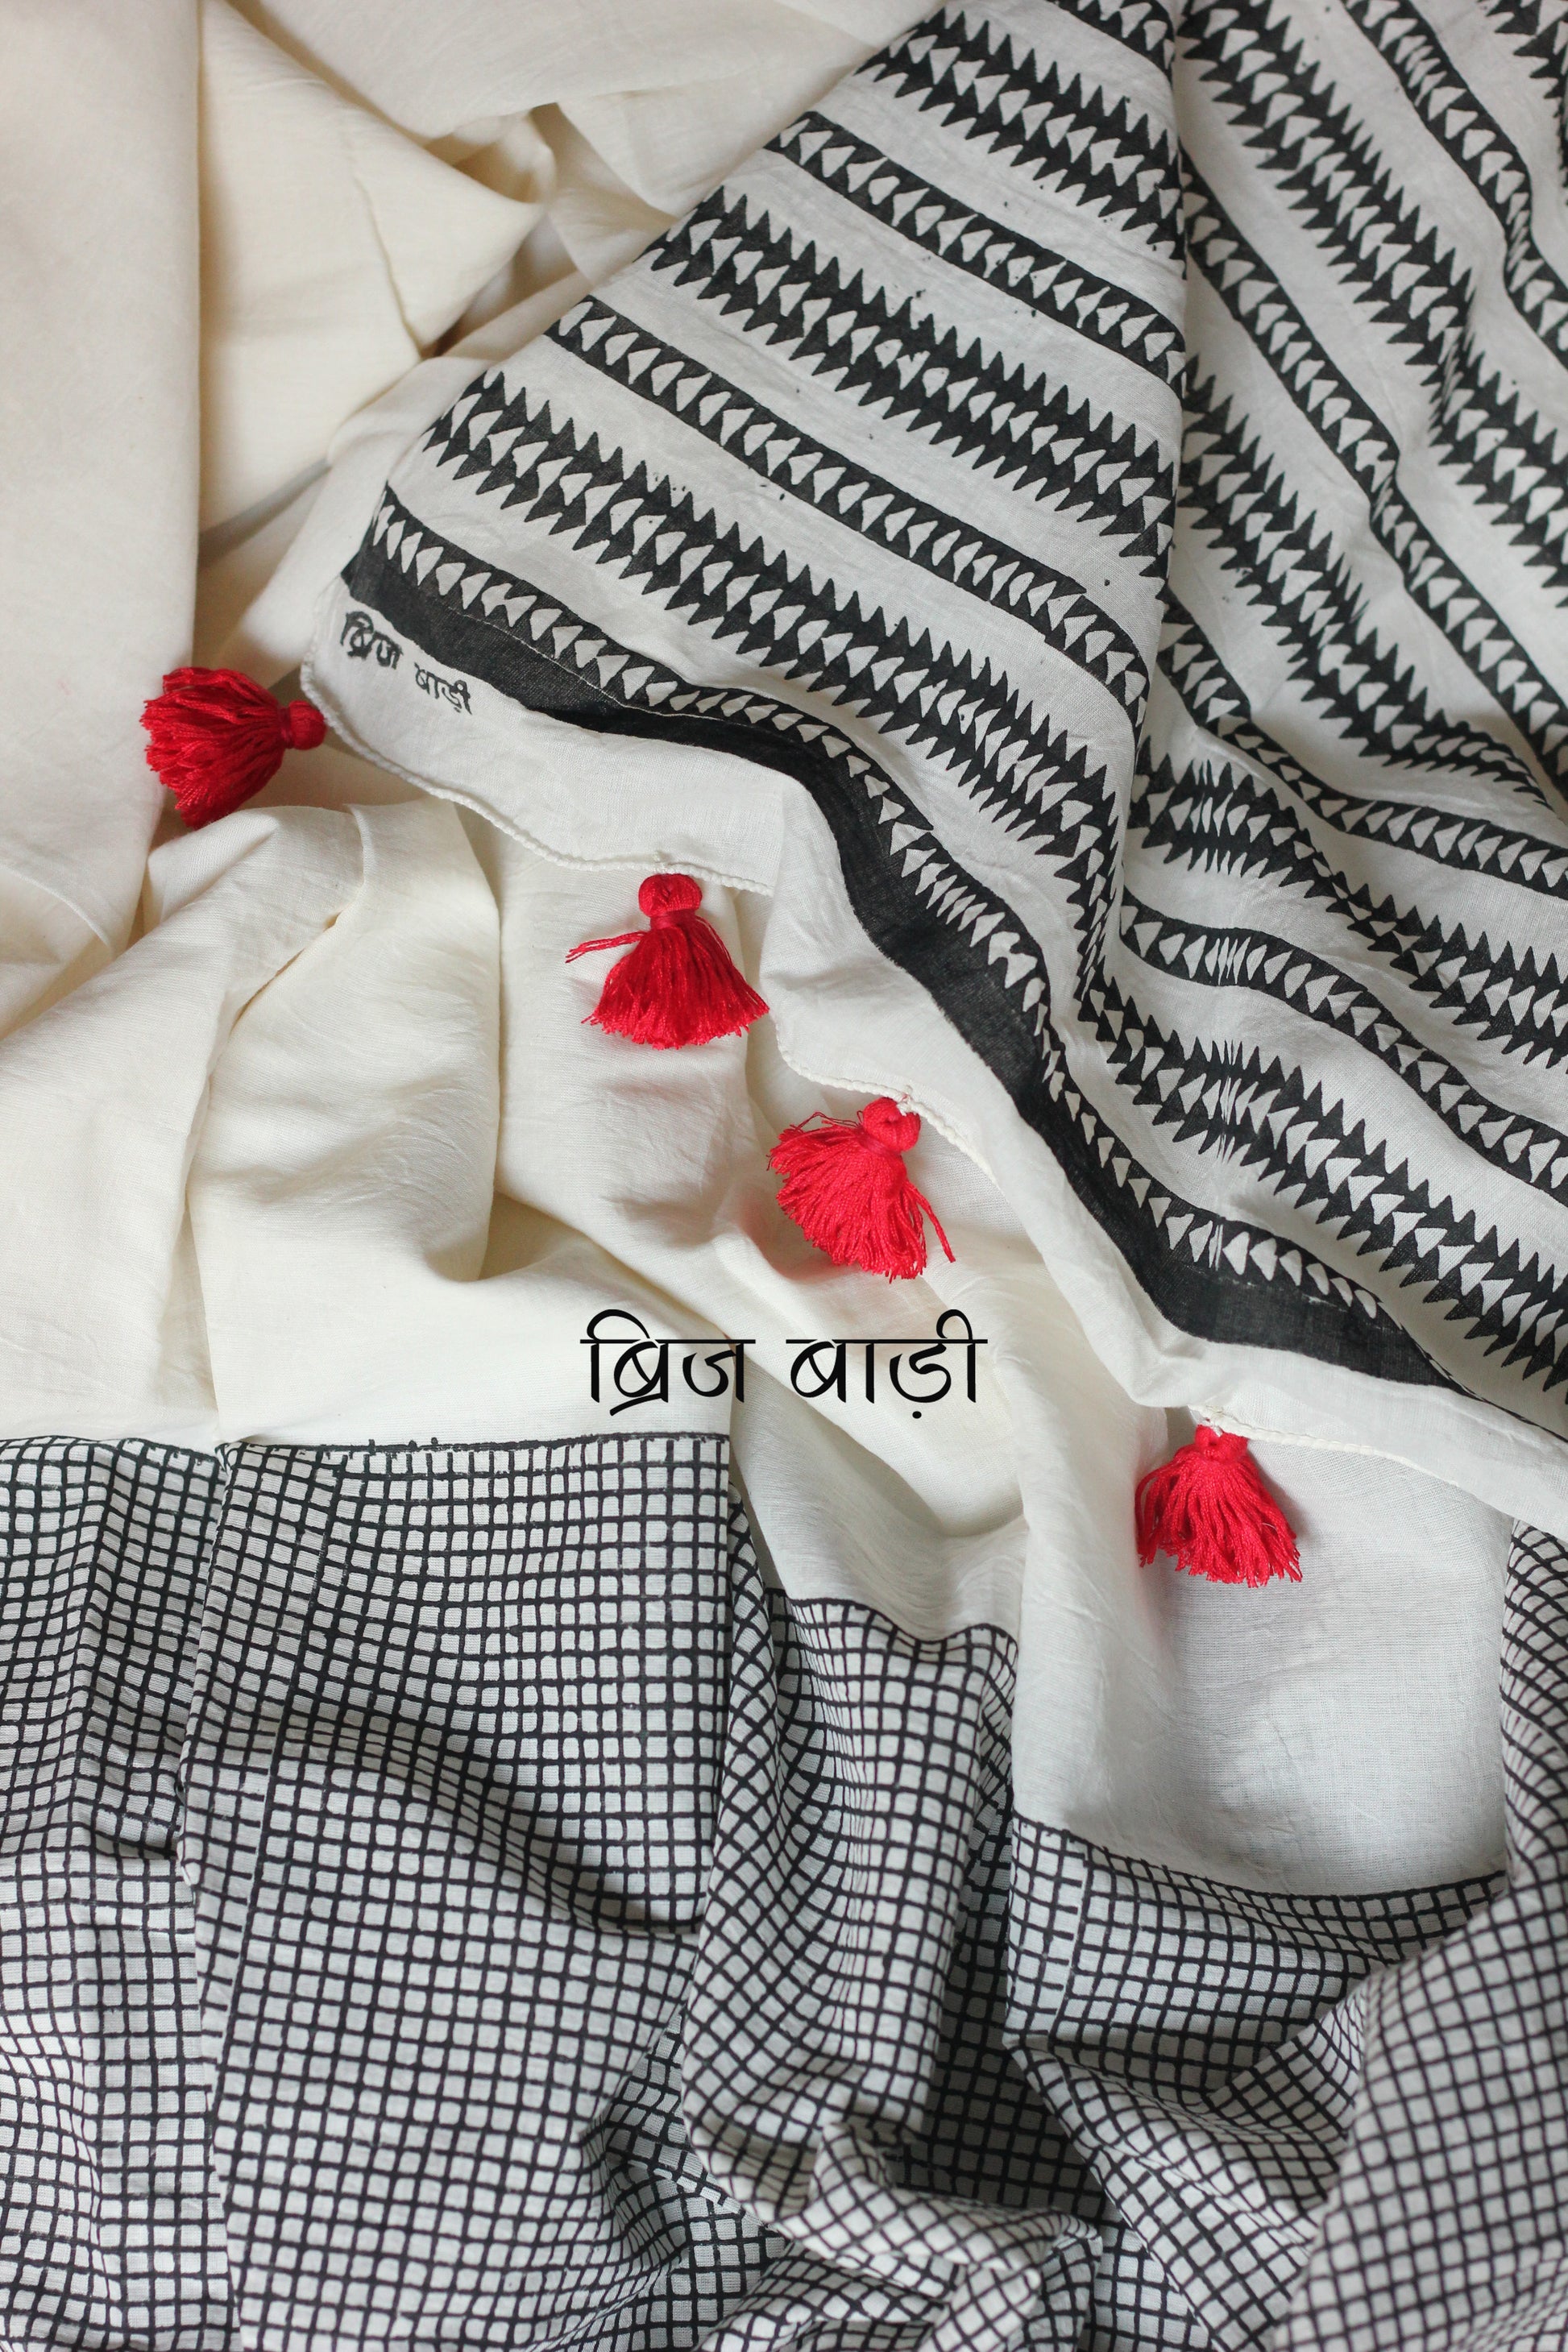 Handcrafted soft breezy stylish white cotton mulmul saree hand block printed by artisans of India. Free Shipping Pan India